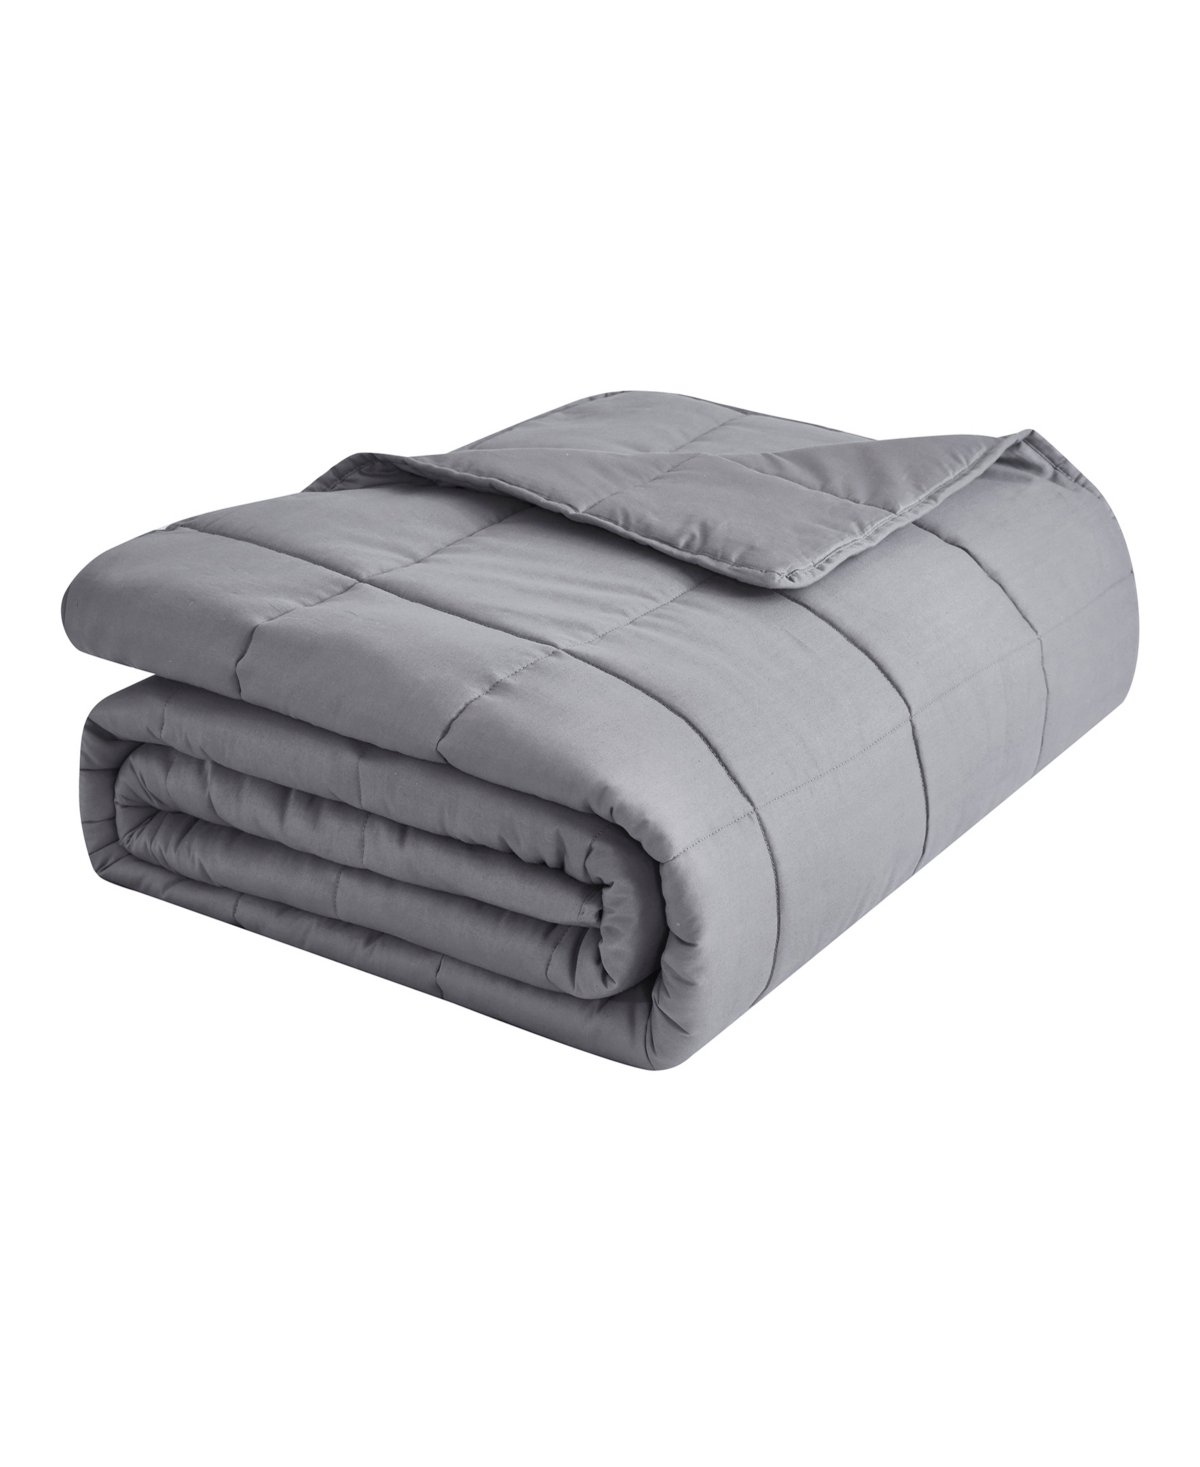 Dream Theory Cotton Weighted 5 Lbs Blanket, One Size Bedding In Gray